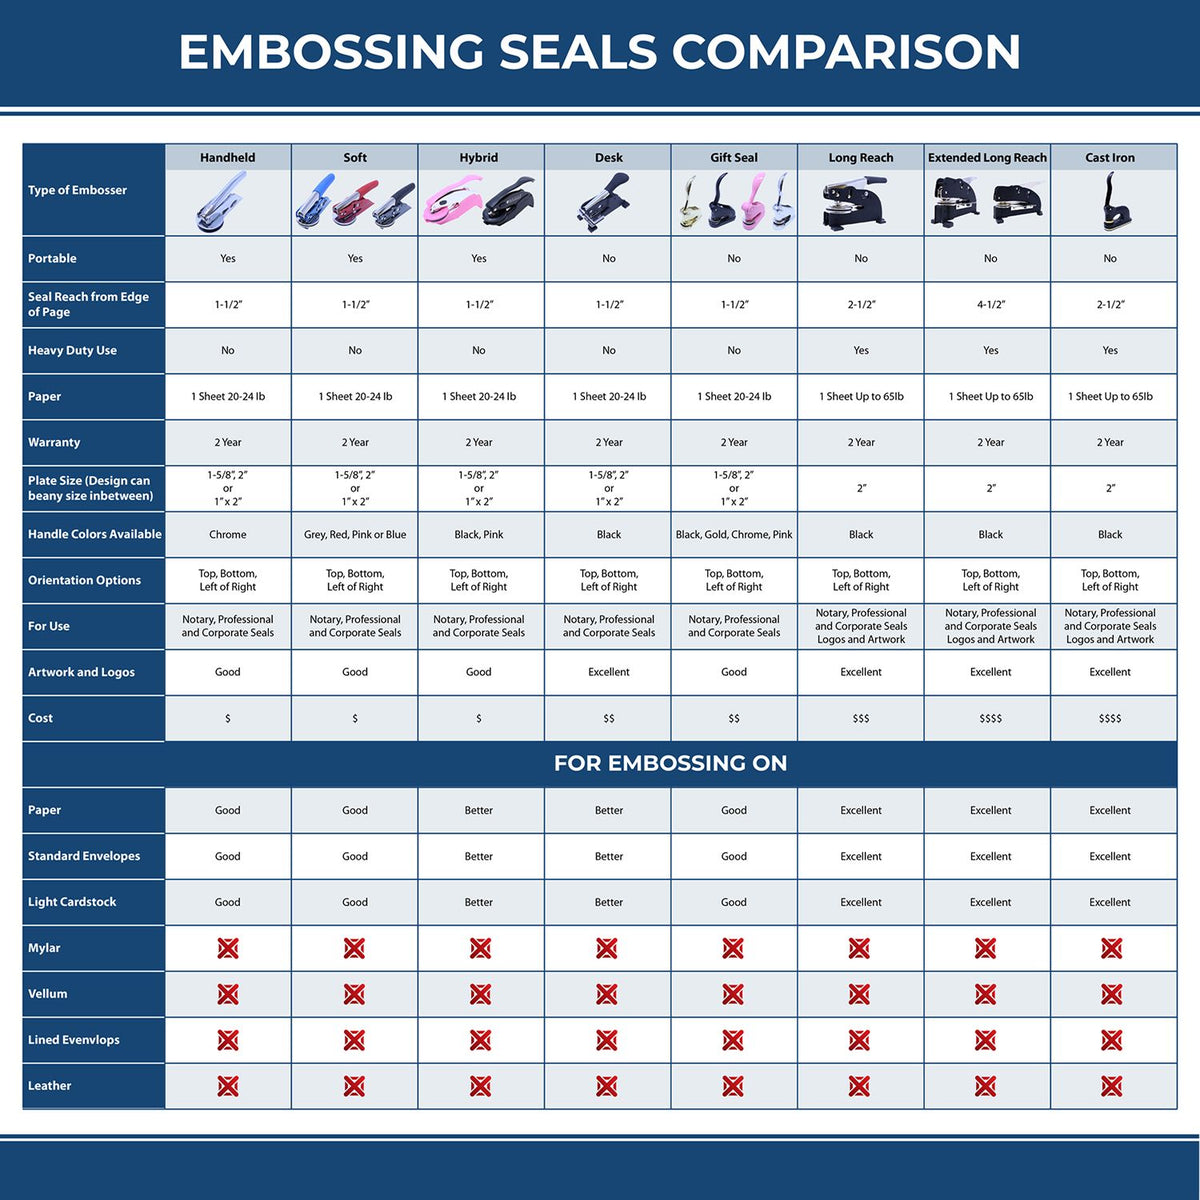 A comparison chart for the different types of mount models available for the Extended Long Reach Vermont Architect Seal Embosser.